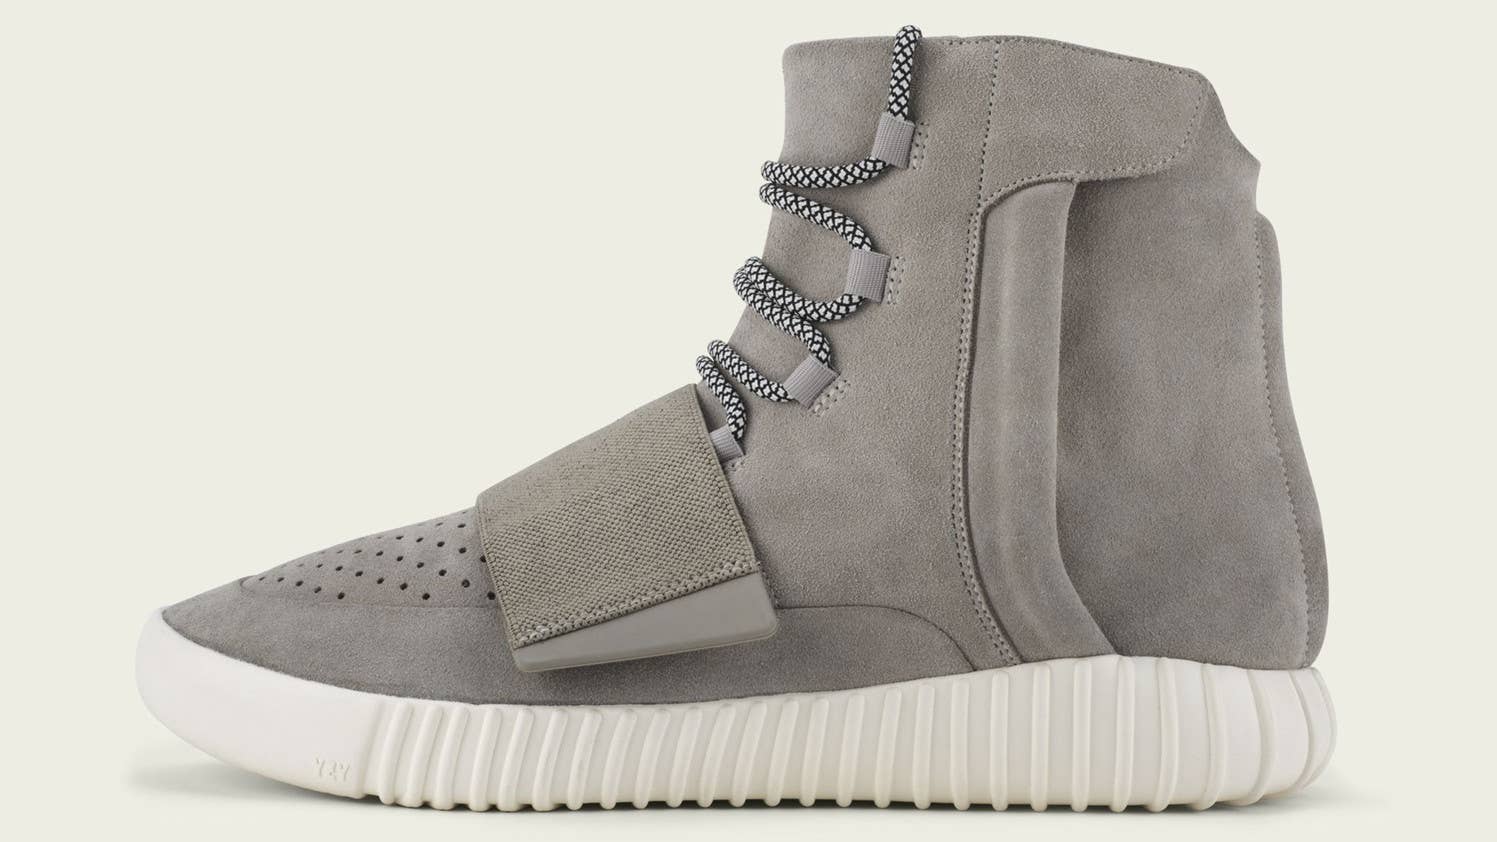 Adidas Yeezy 750 Boost Re Release